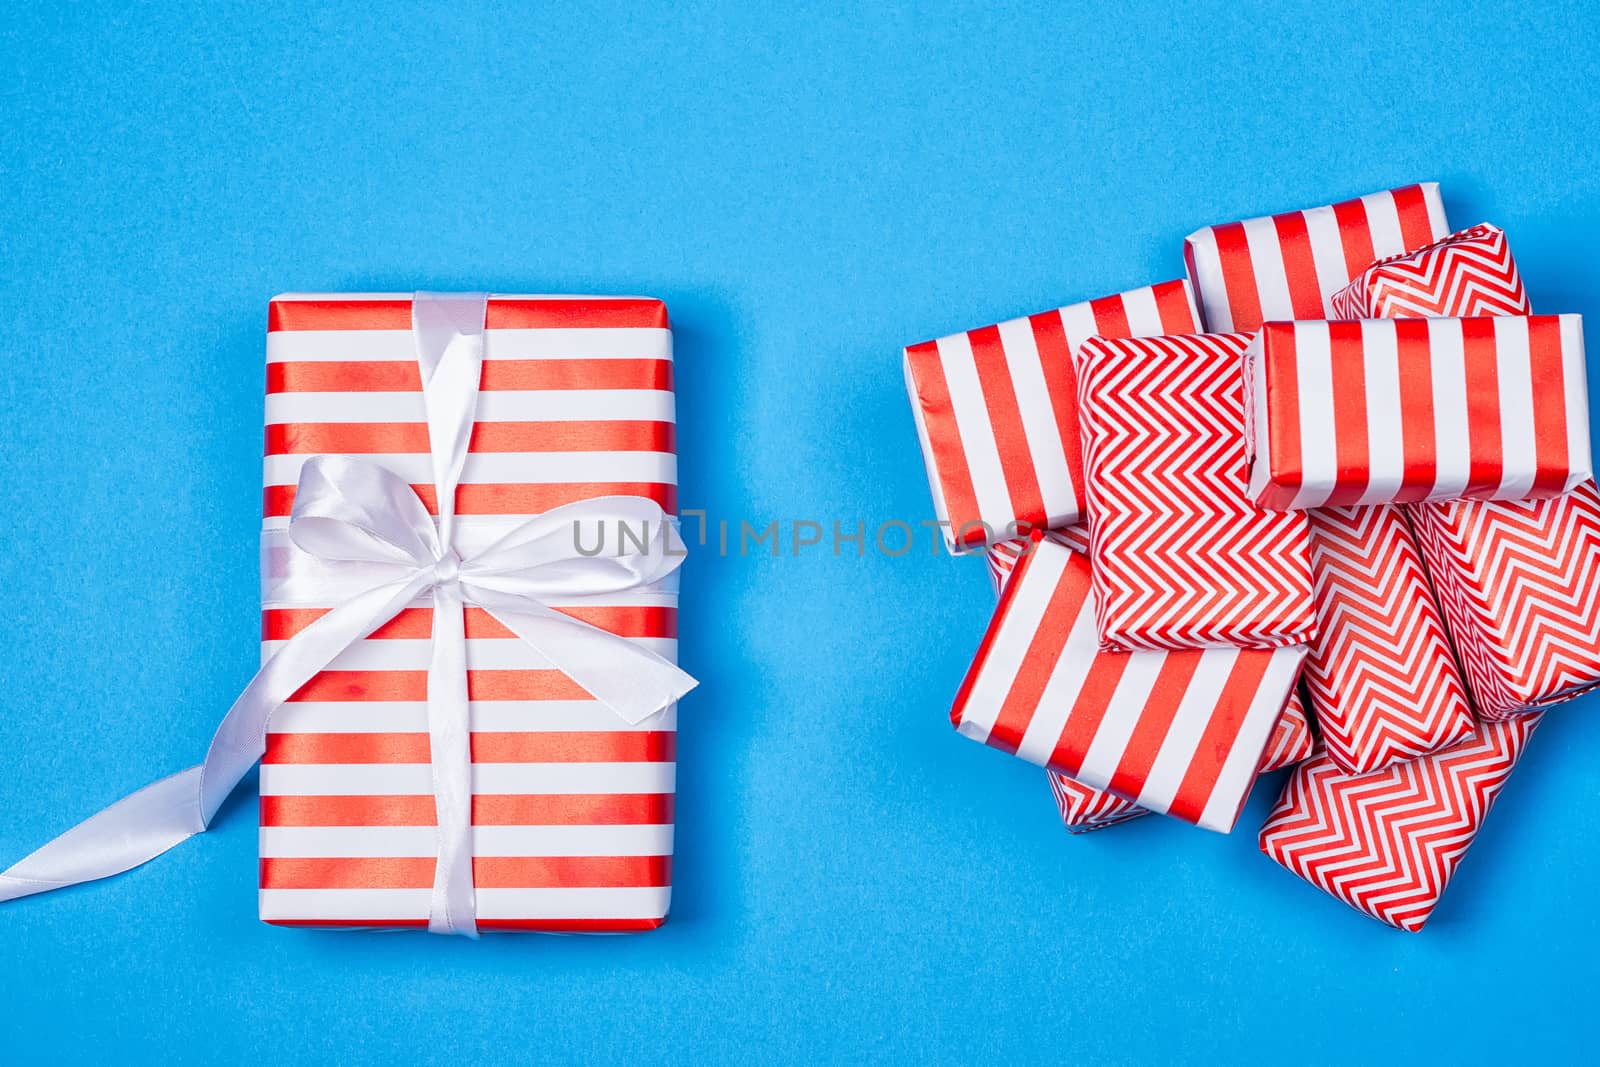 Hill red and white gifts on the blue background